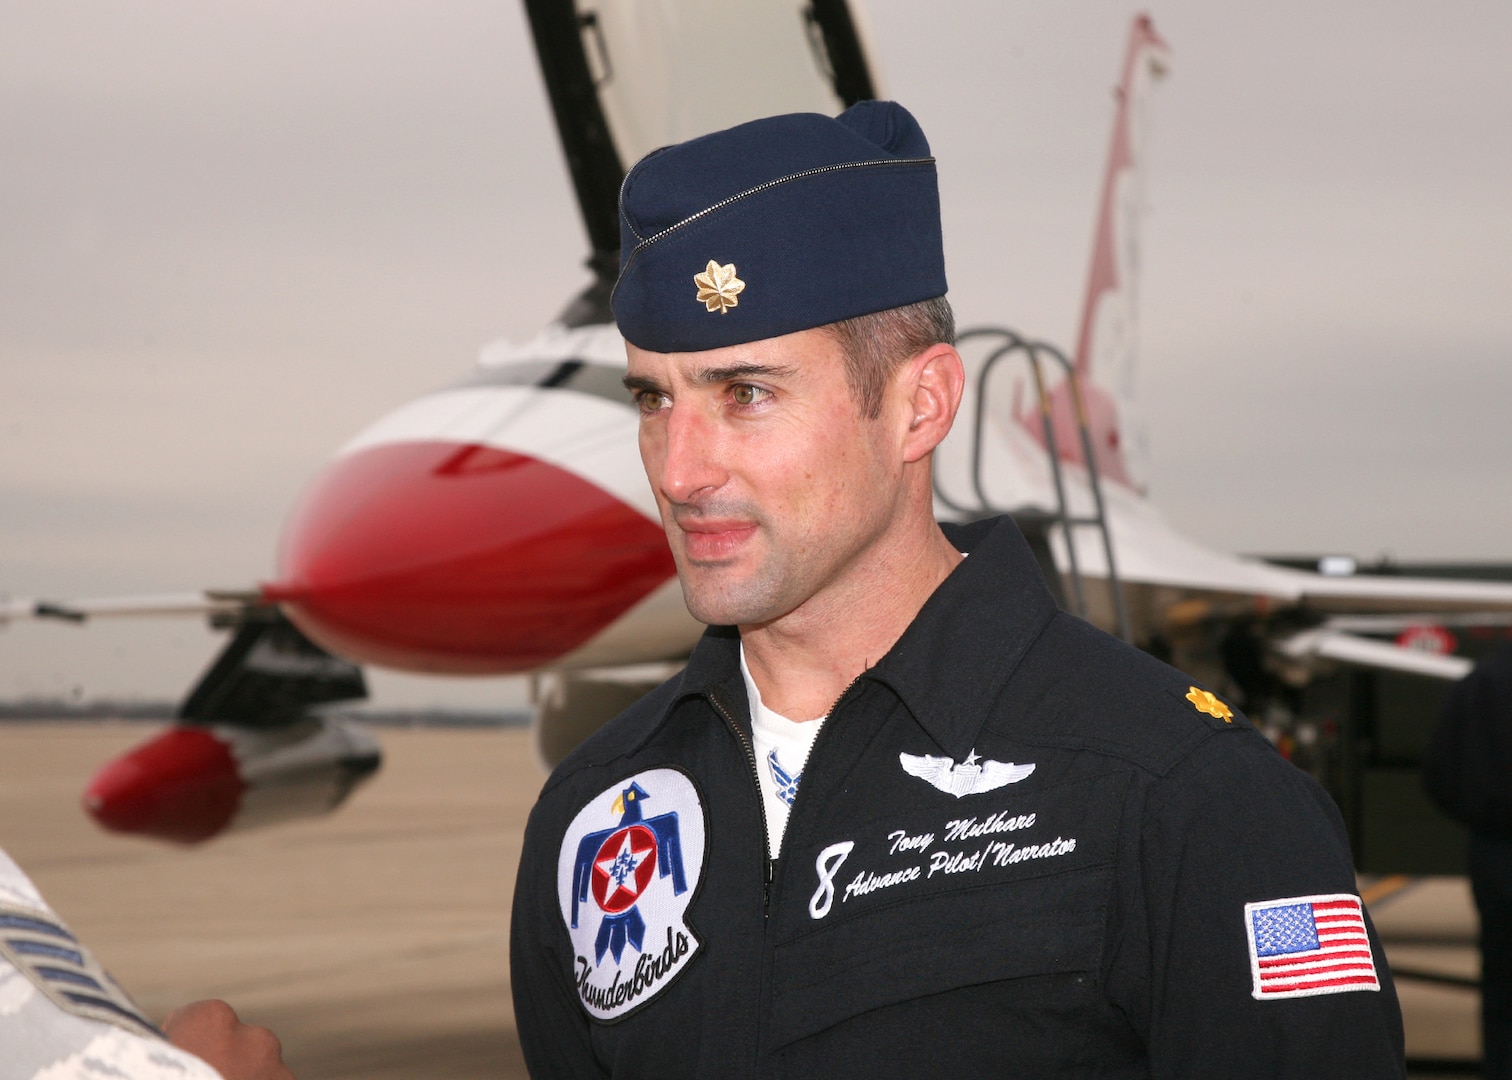 Maj. Anthony Mulhare, Air Force Thunderbirds advance pilot, talks about the team's upcoming performances during AirFest 2010, Nov. 6 - 7. (U.S. Air Force photo/Robbin Cresswell)